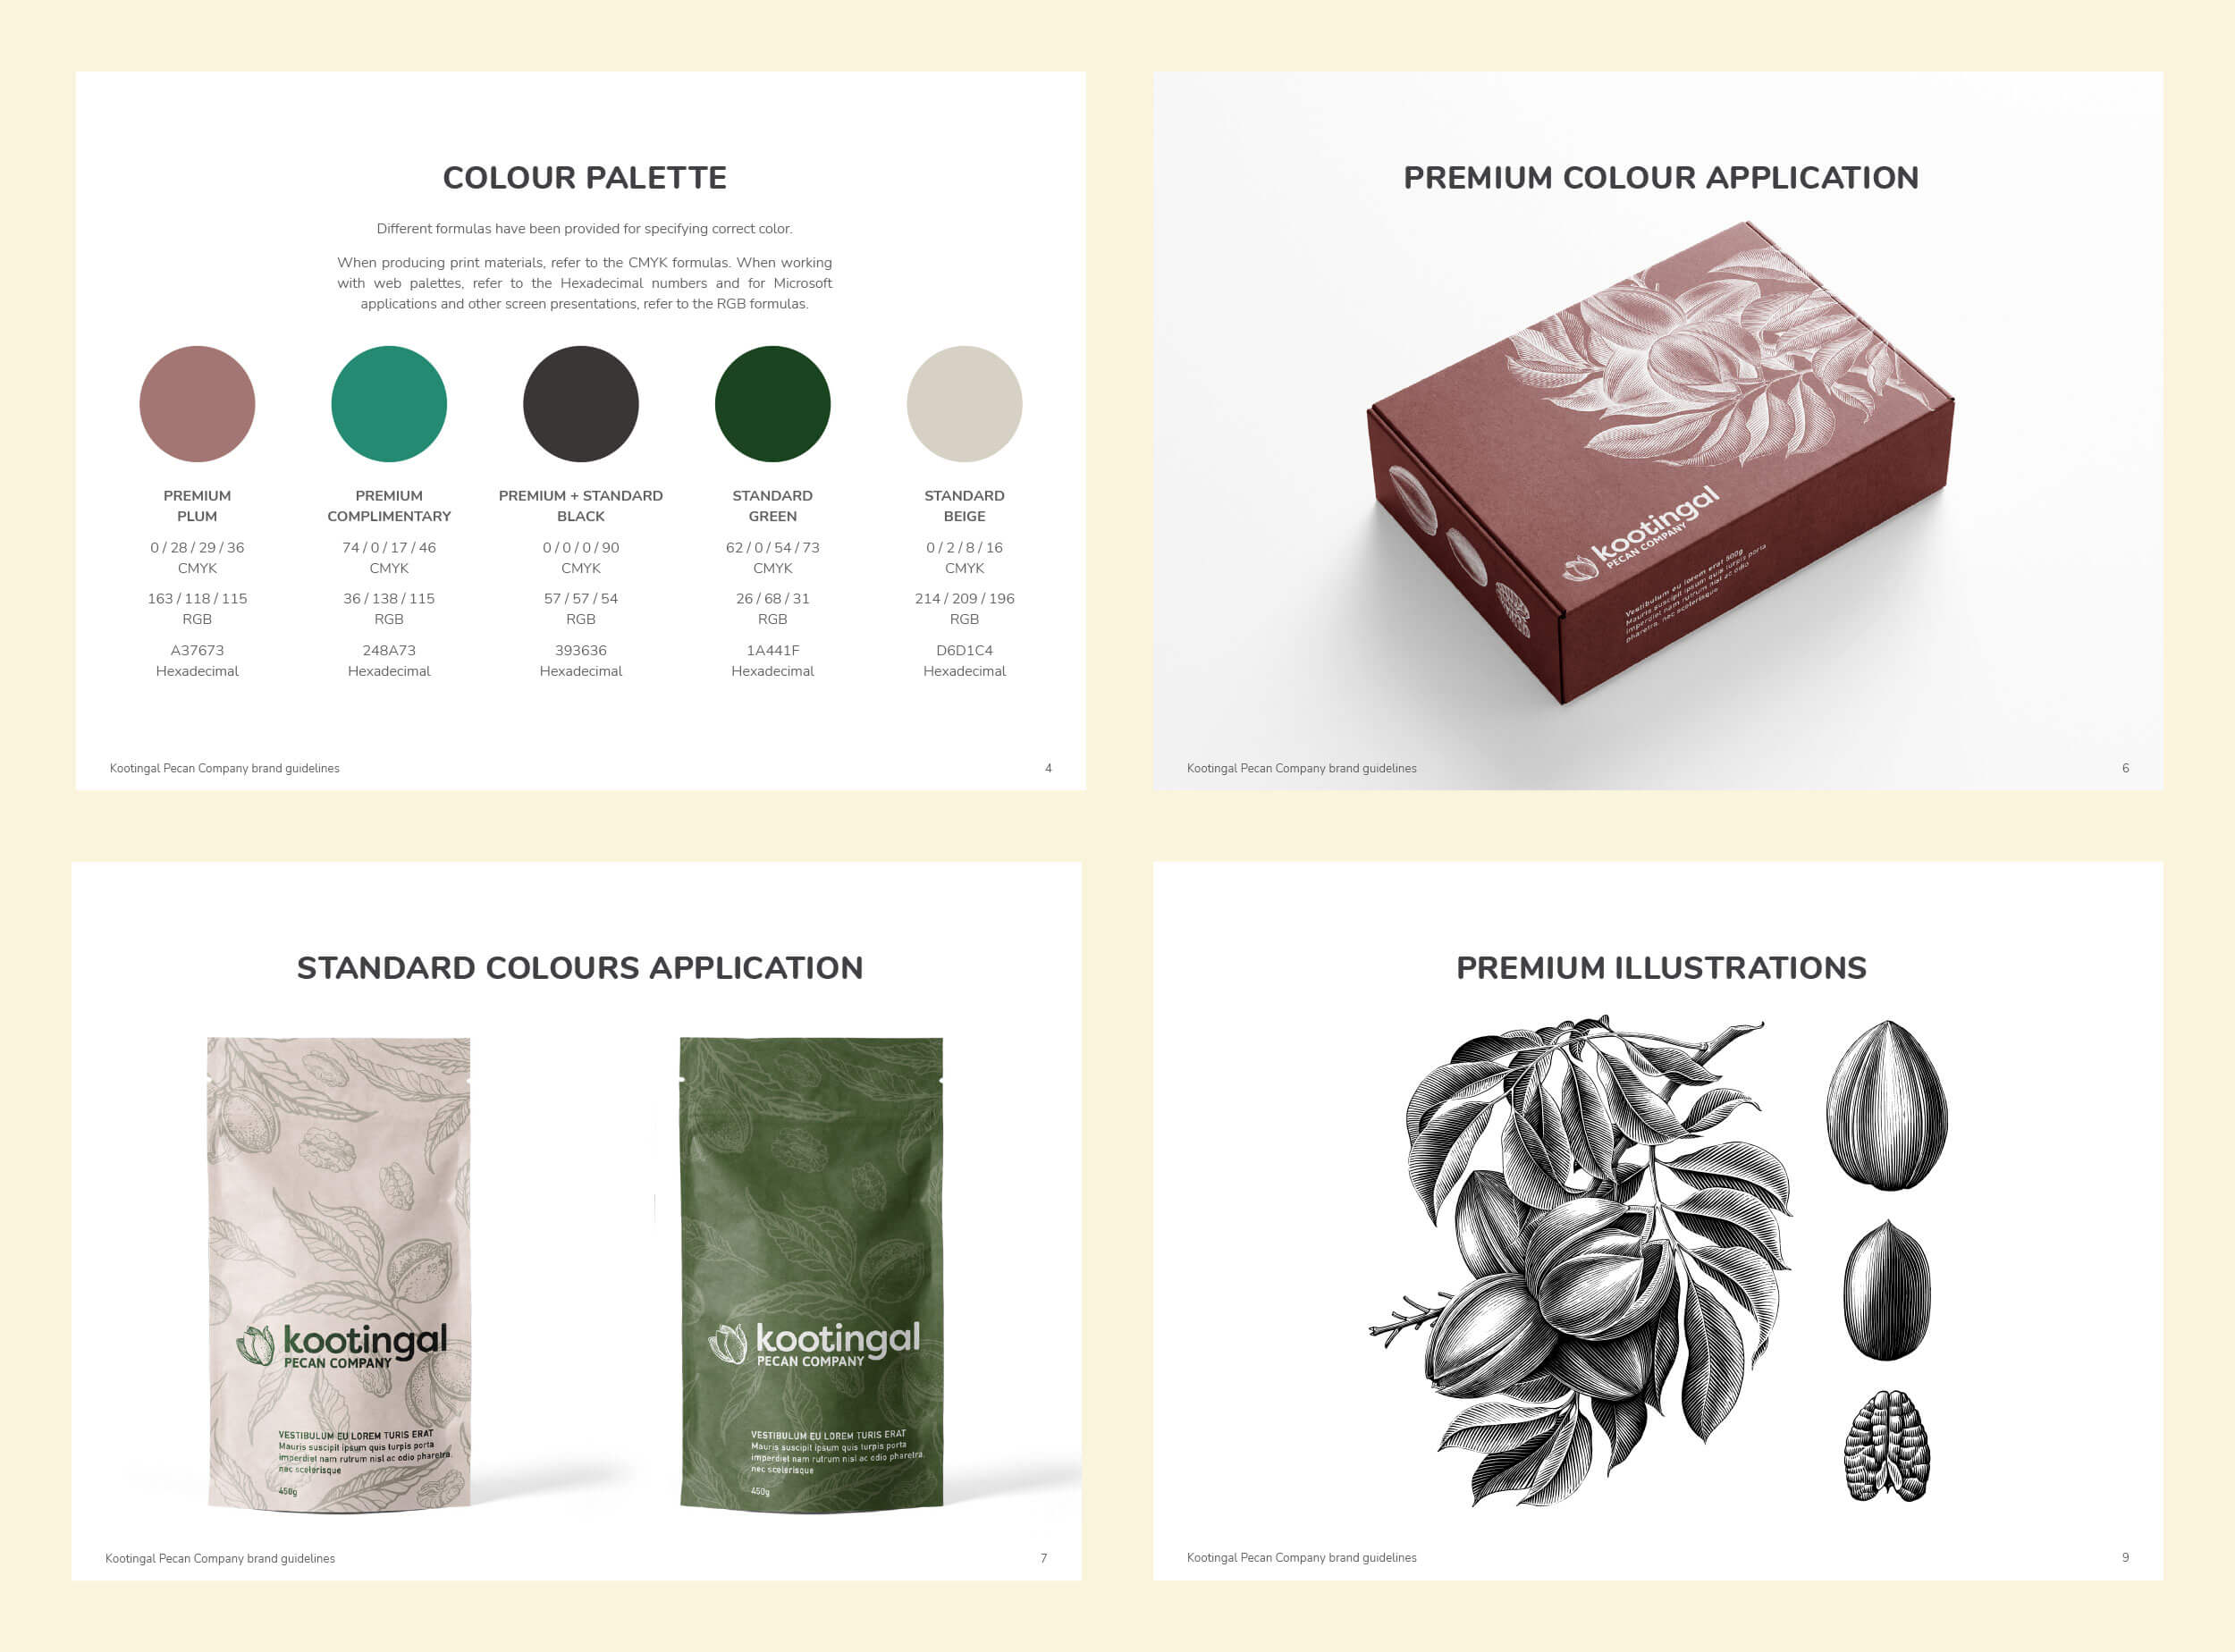 Pages form the Kootingal Pecan Company brand guidelines